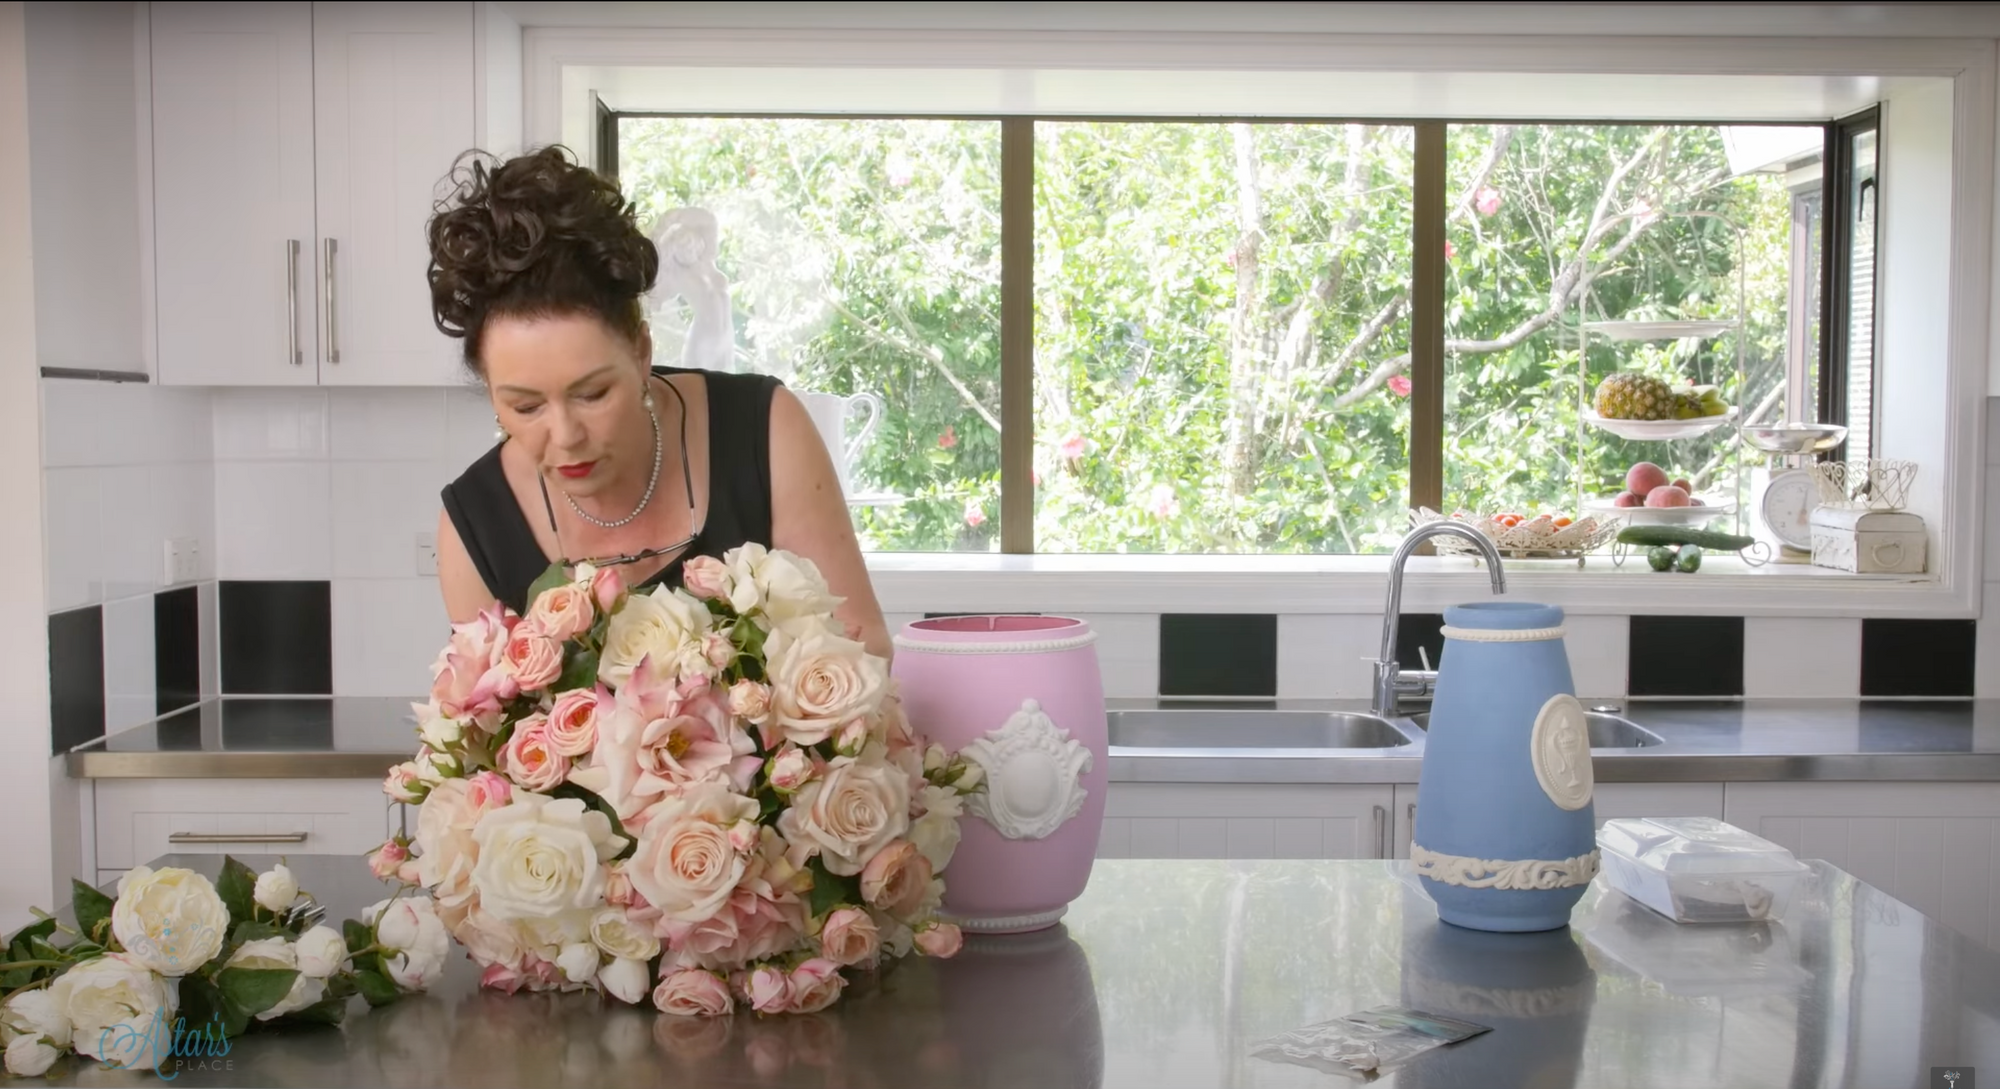 Wedding Floristry Idea: Pink Roses into a Pink Wedgewood Inspired Vase